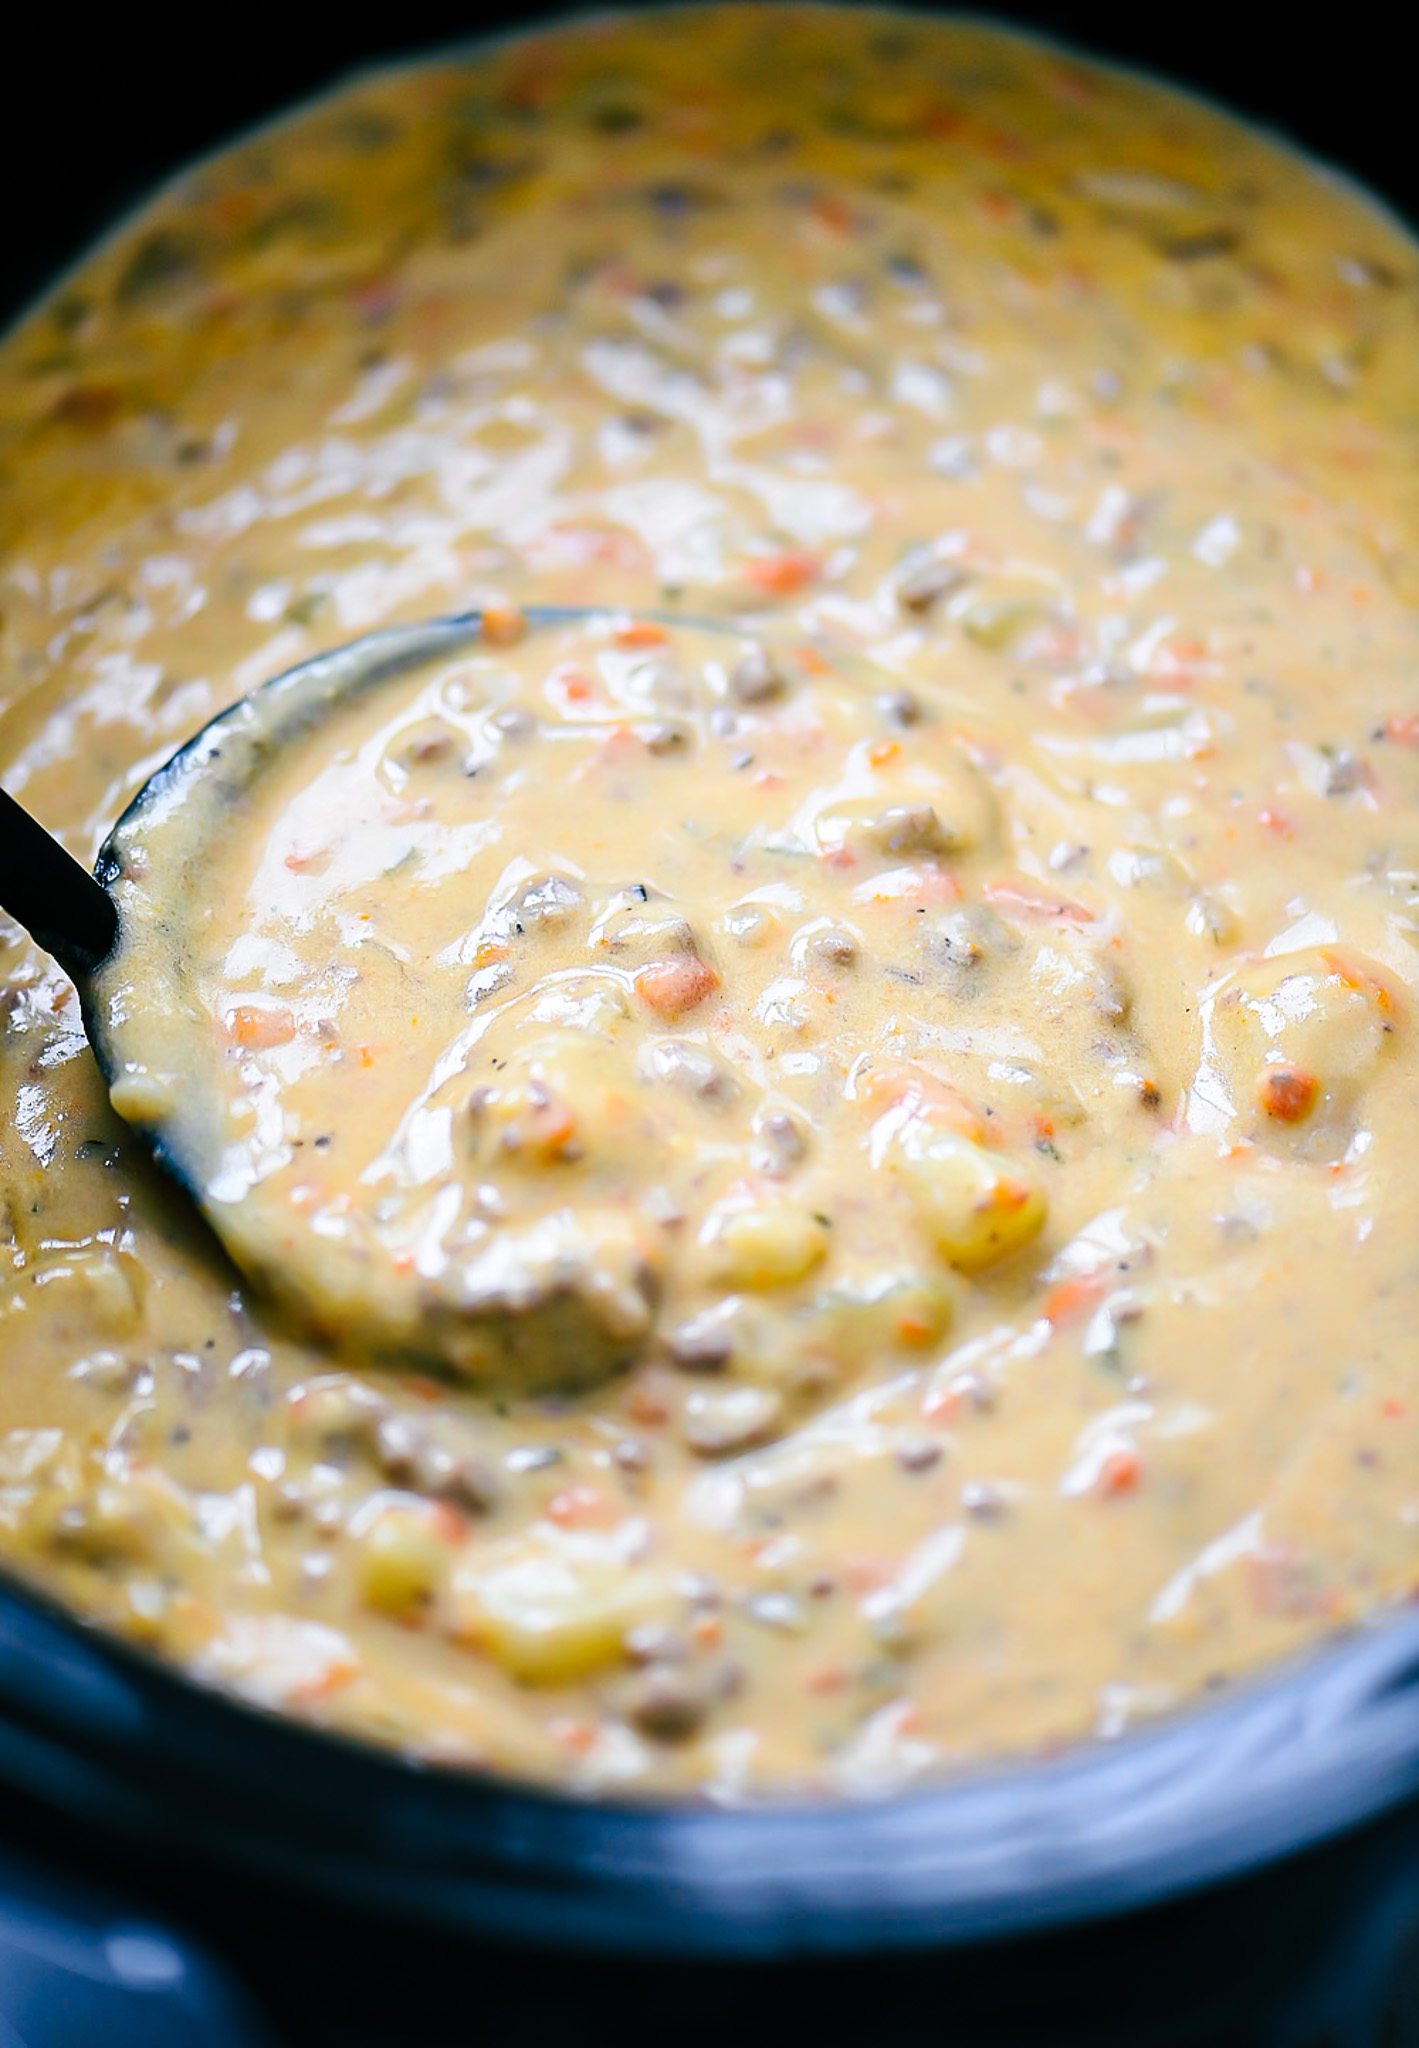 Creamy soup loaded with beef, potatoes, carrots and more. 